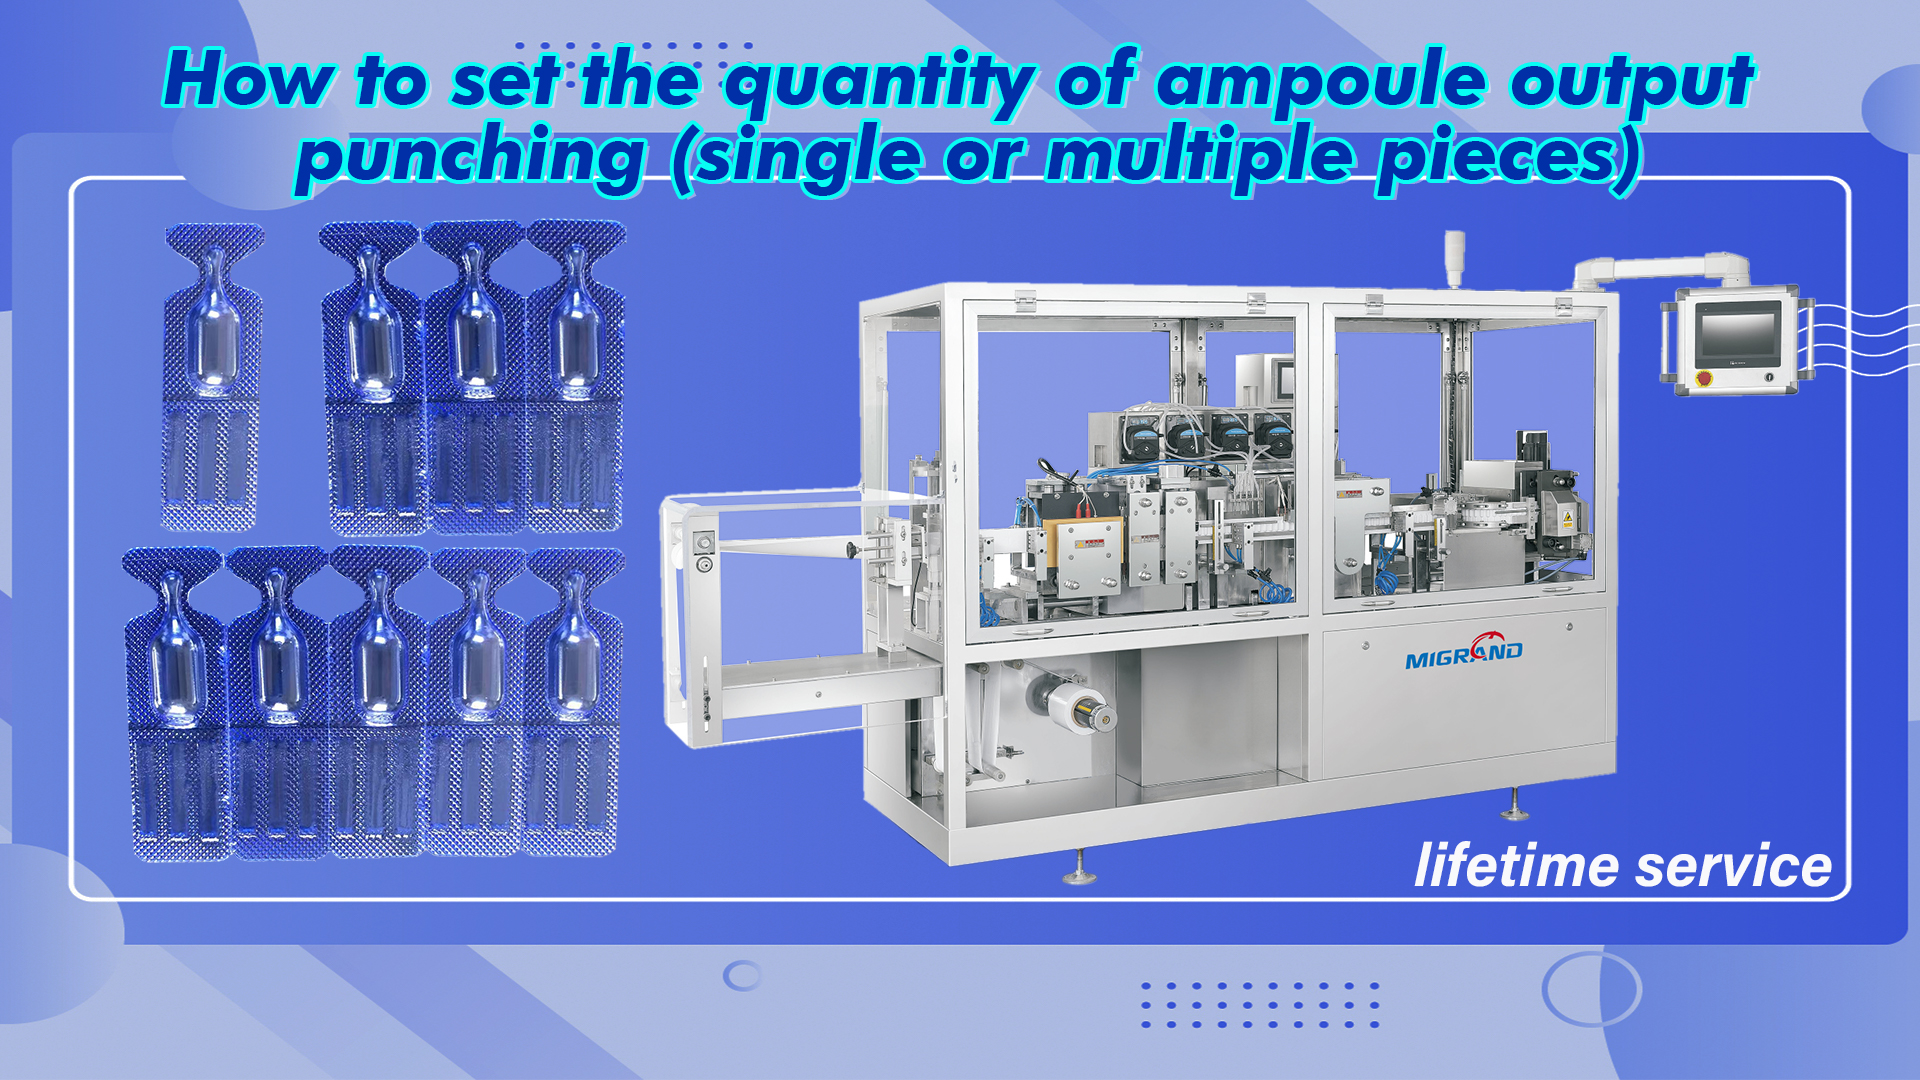 How to set the quantity of ampoule output punching (single or multiple pieces)